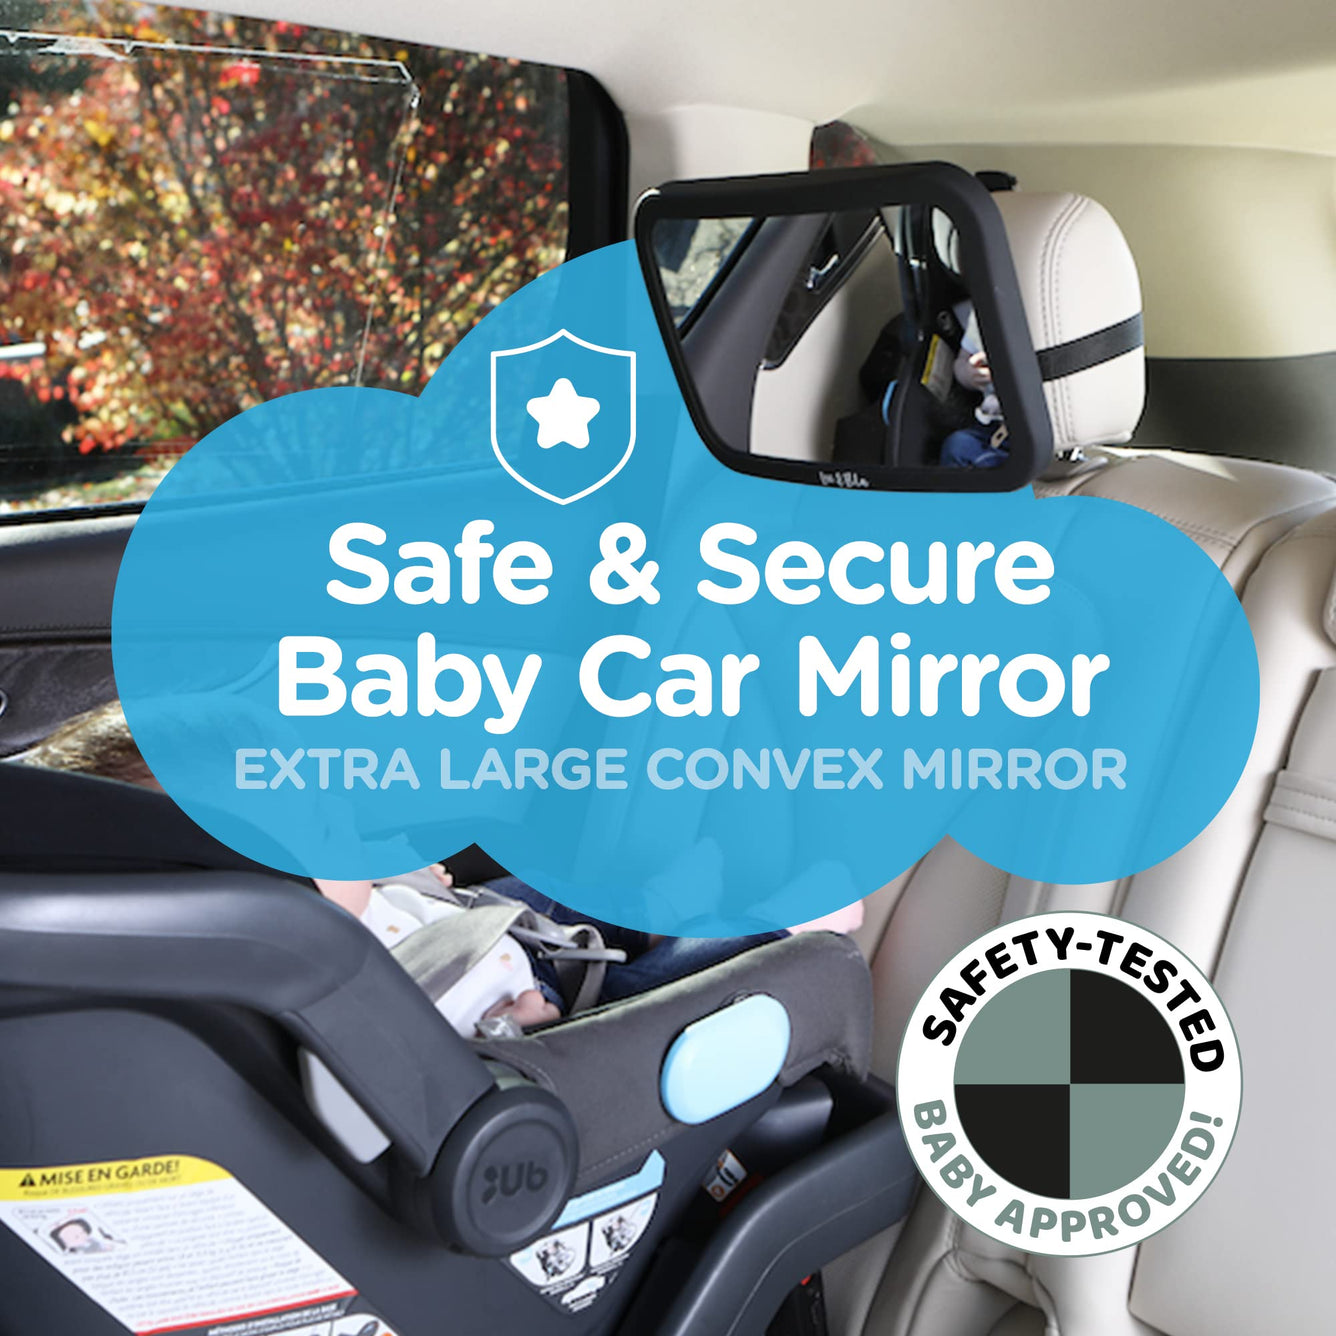  Little Chicks Wide Angle Adjustable Backseat Car Mirror - Baby  Car Mirror for Rear Facing Car Seat - 360 Swivel Crystal Clear Optimal View  - Easy Monitoring for Newborns, Infants and Toddlers : Baby